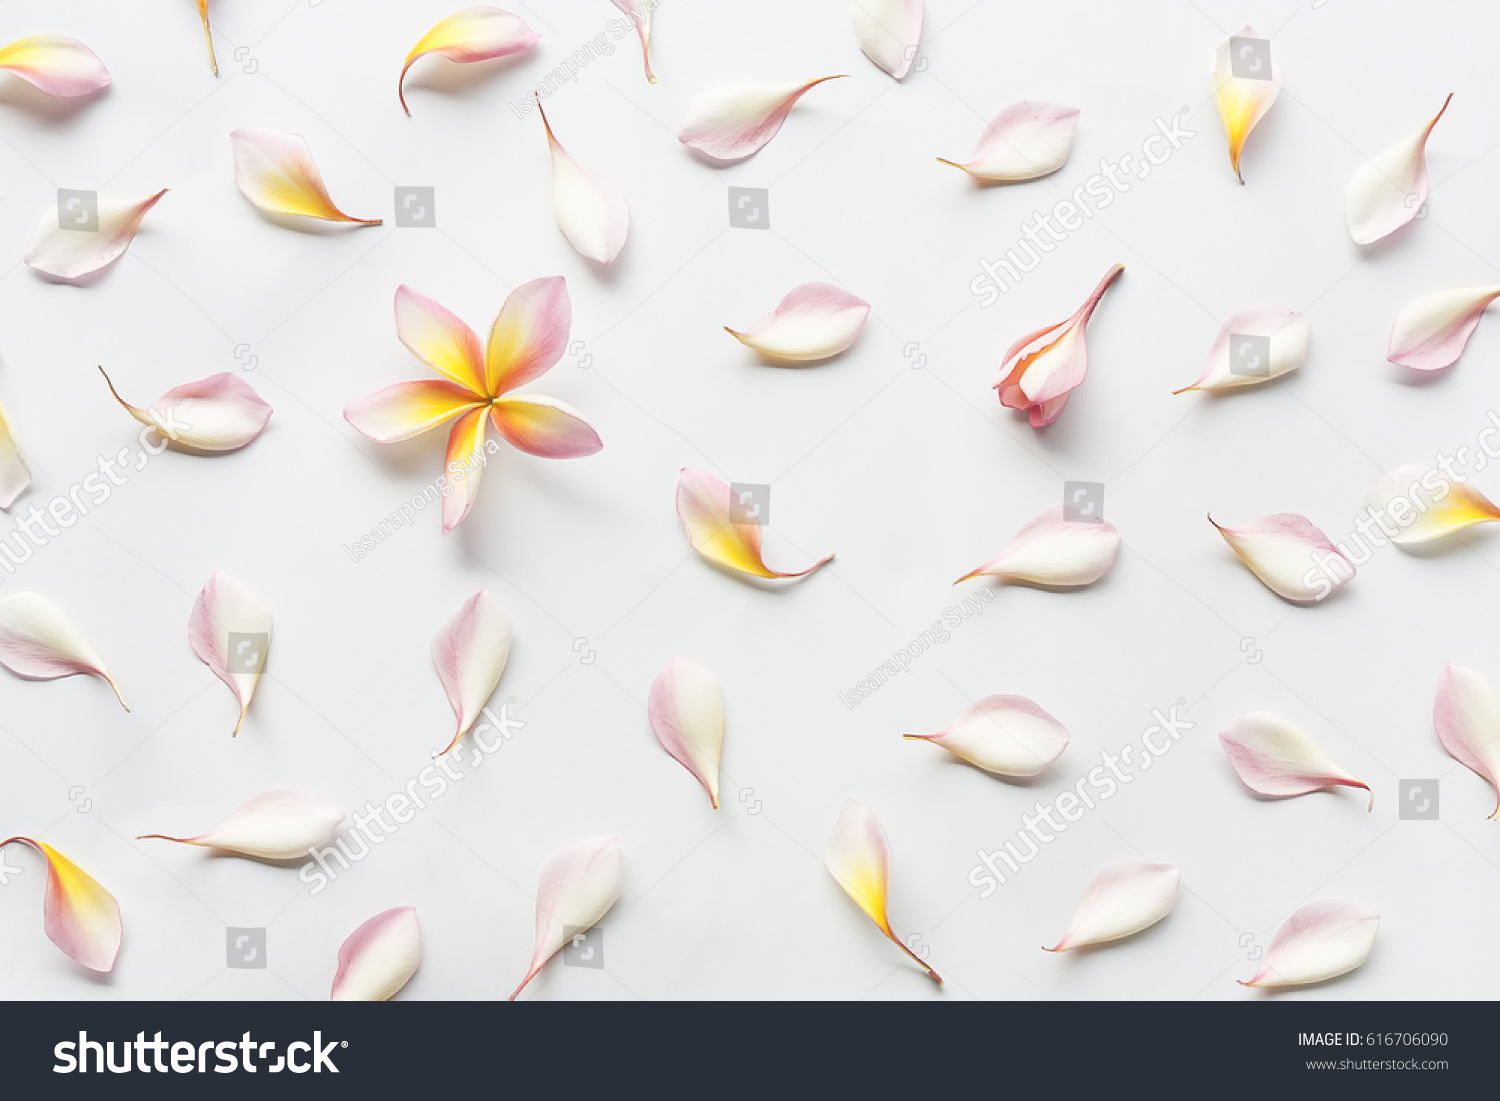 wallpaper pattern of plumeria flowers laying on white background. Concept of love and spring. Flat lay, top view. #616706090